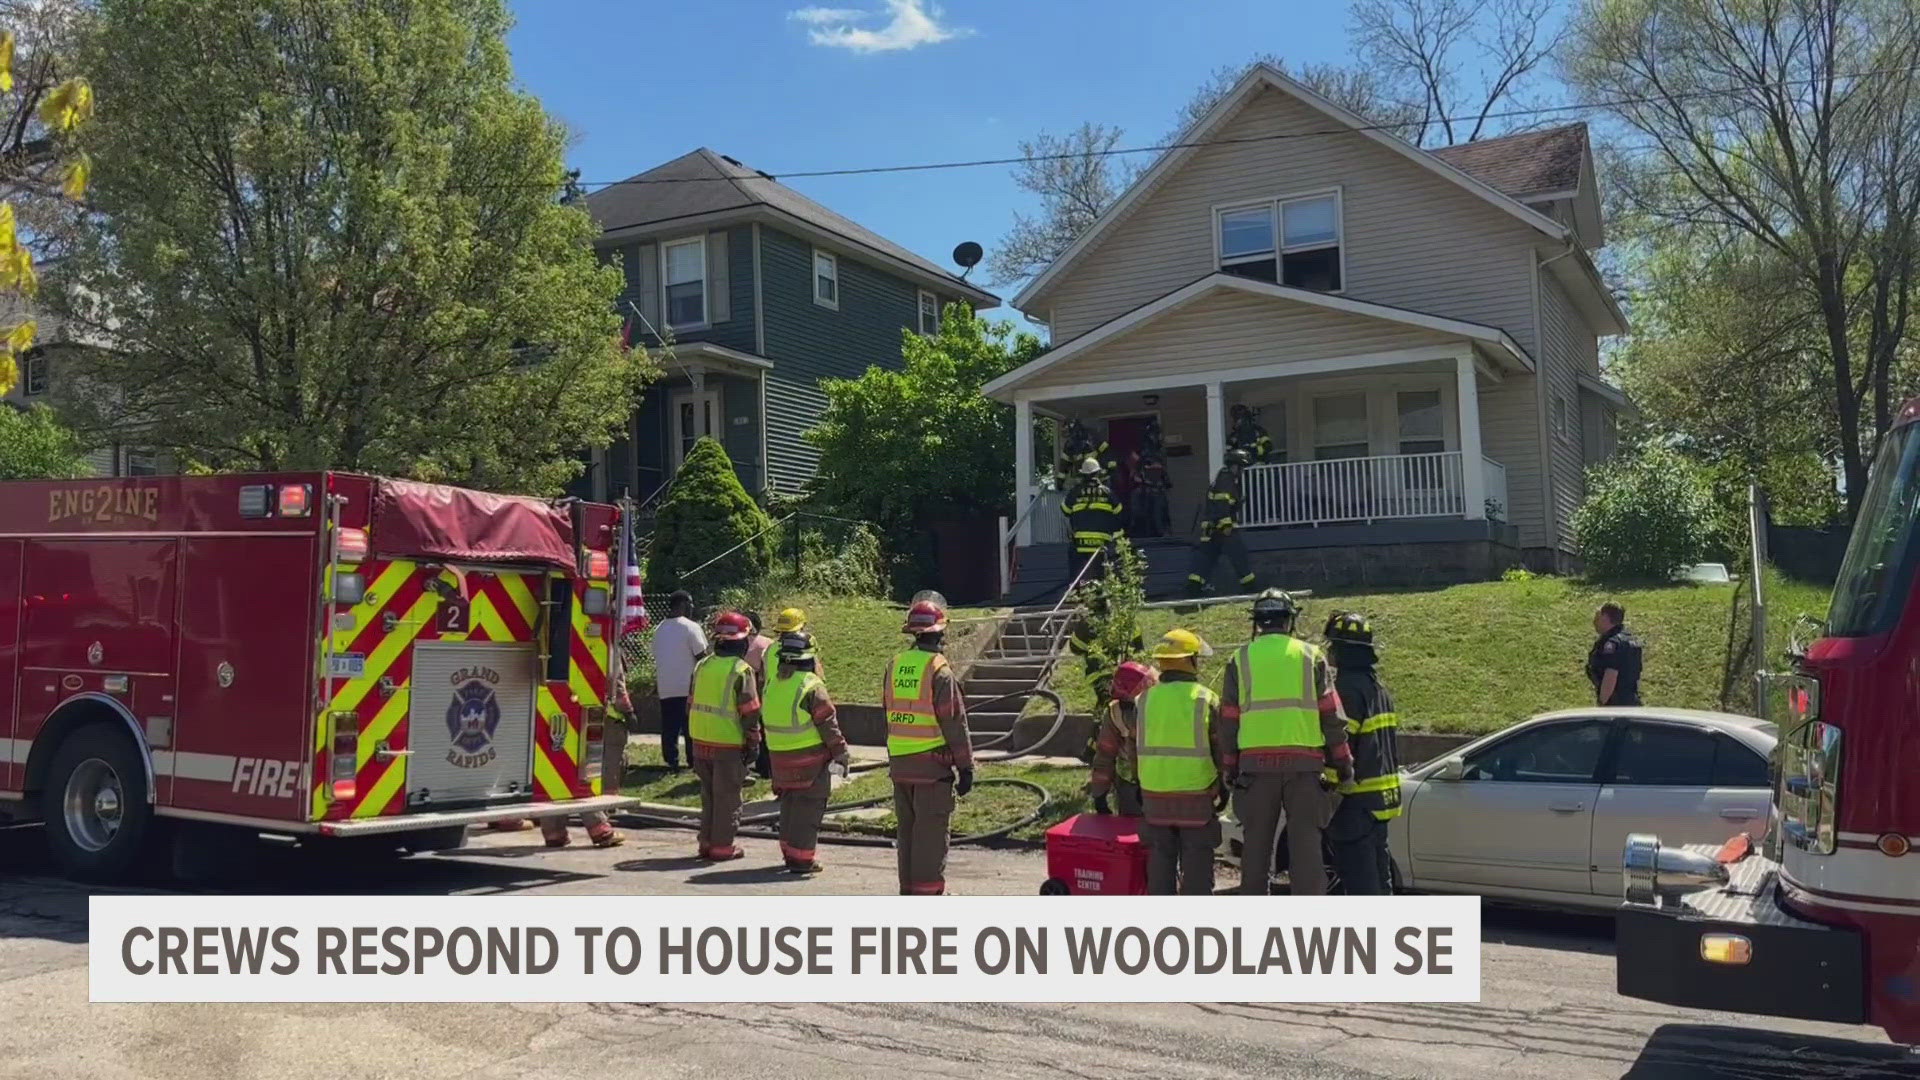 A man ran into the home on Woodlawn to get children out of the home Wednesday afternoon. No one was hurt, authorities said.